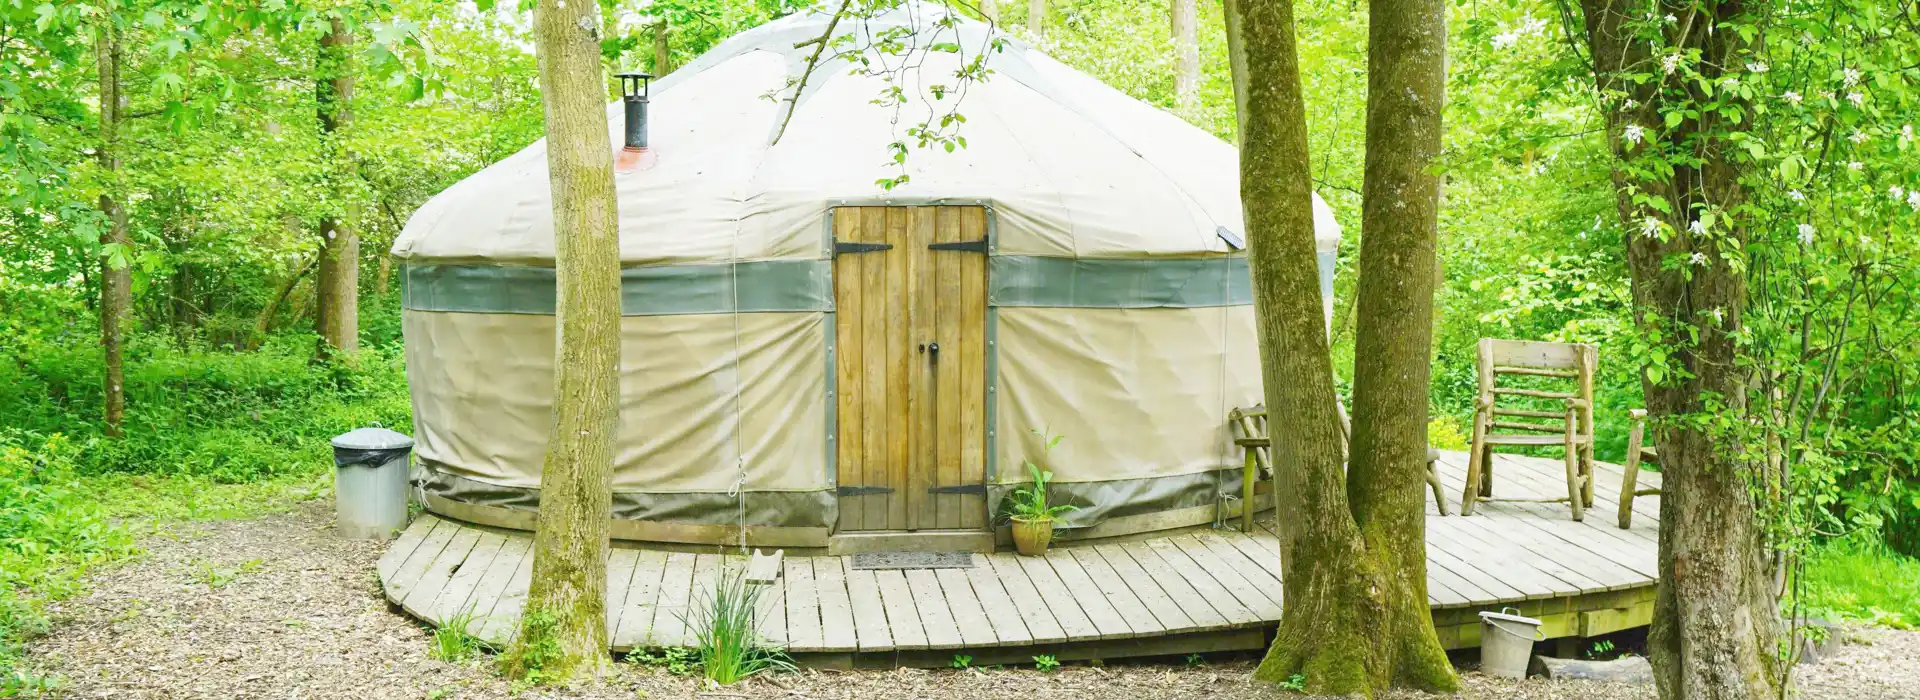 Glamping in Sussex